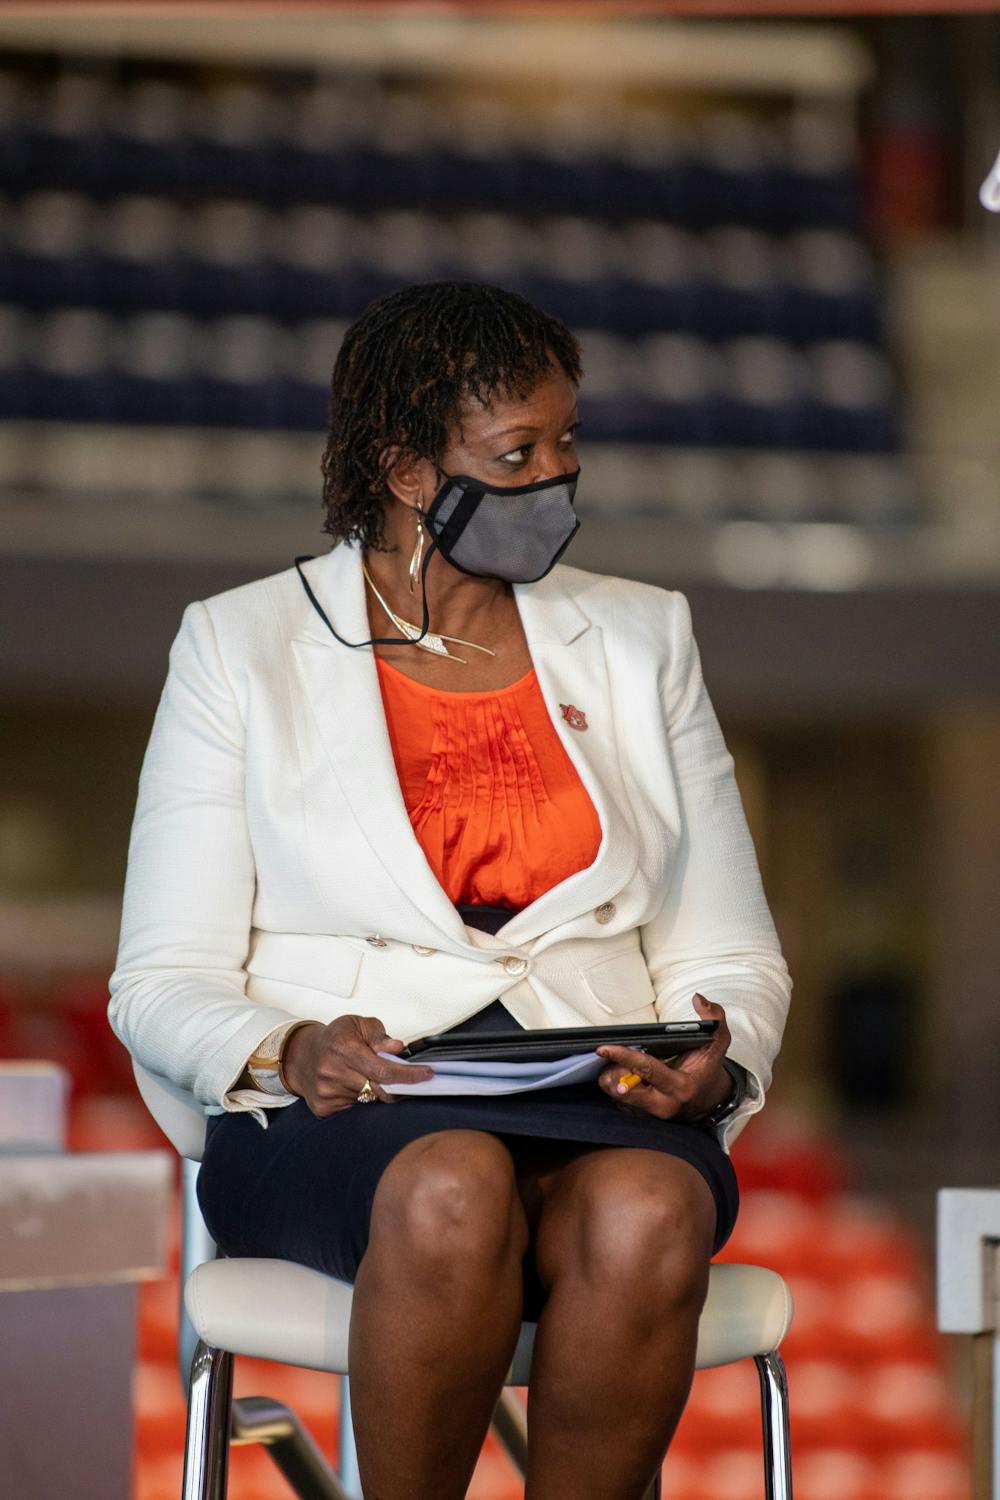 Johnnie Harris the new Auburn Women's Basketball coach at her formal introduction ceremony on Monday, April 5, 2021, in Auburn, Ala. 